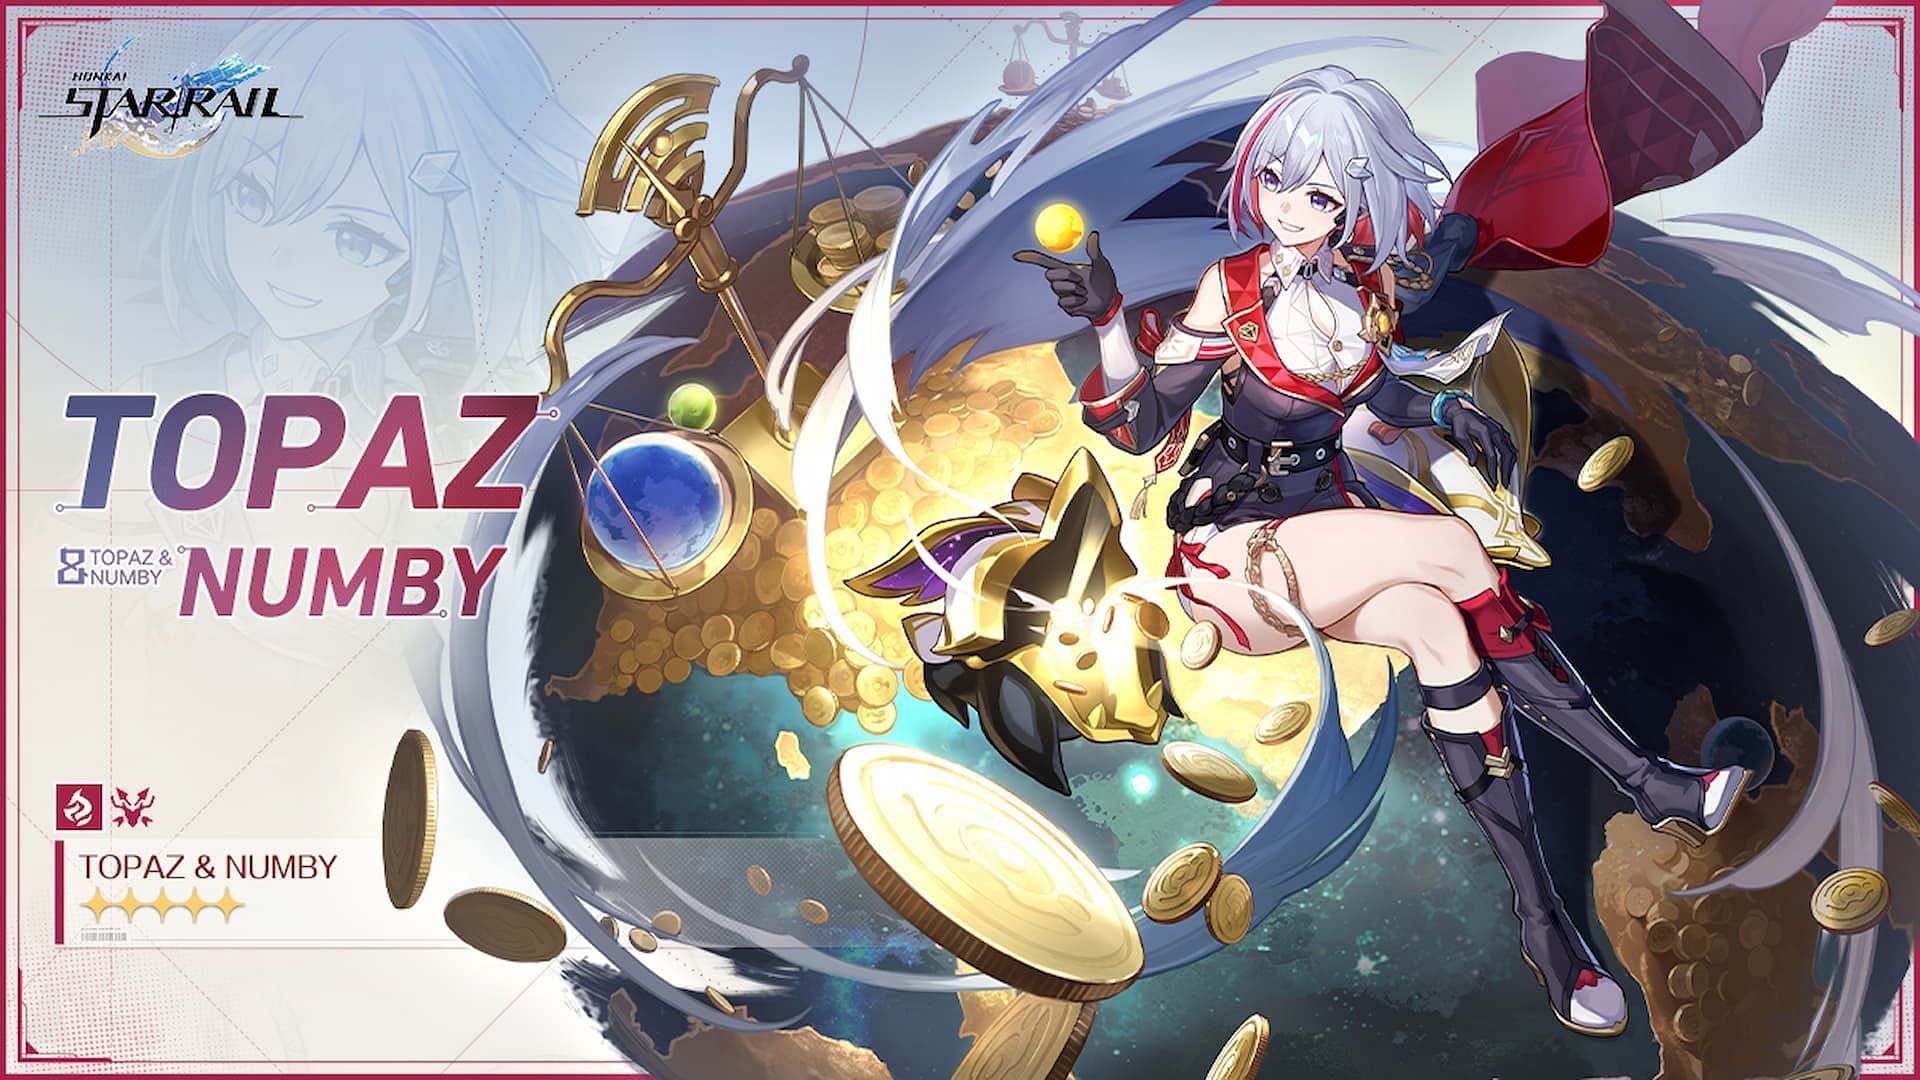 The official character banner for Topaz